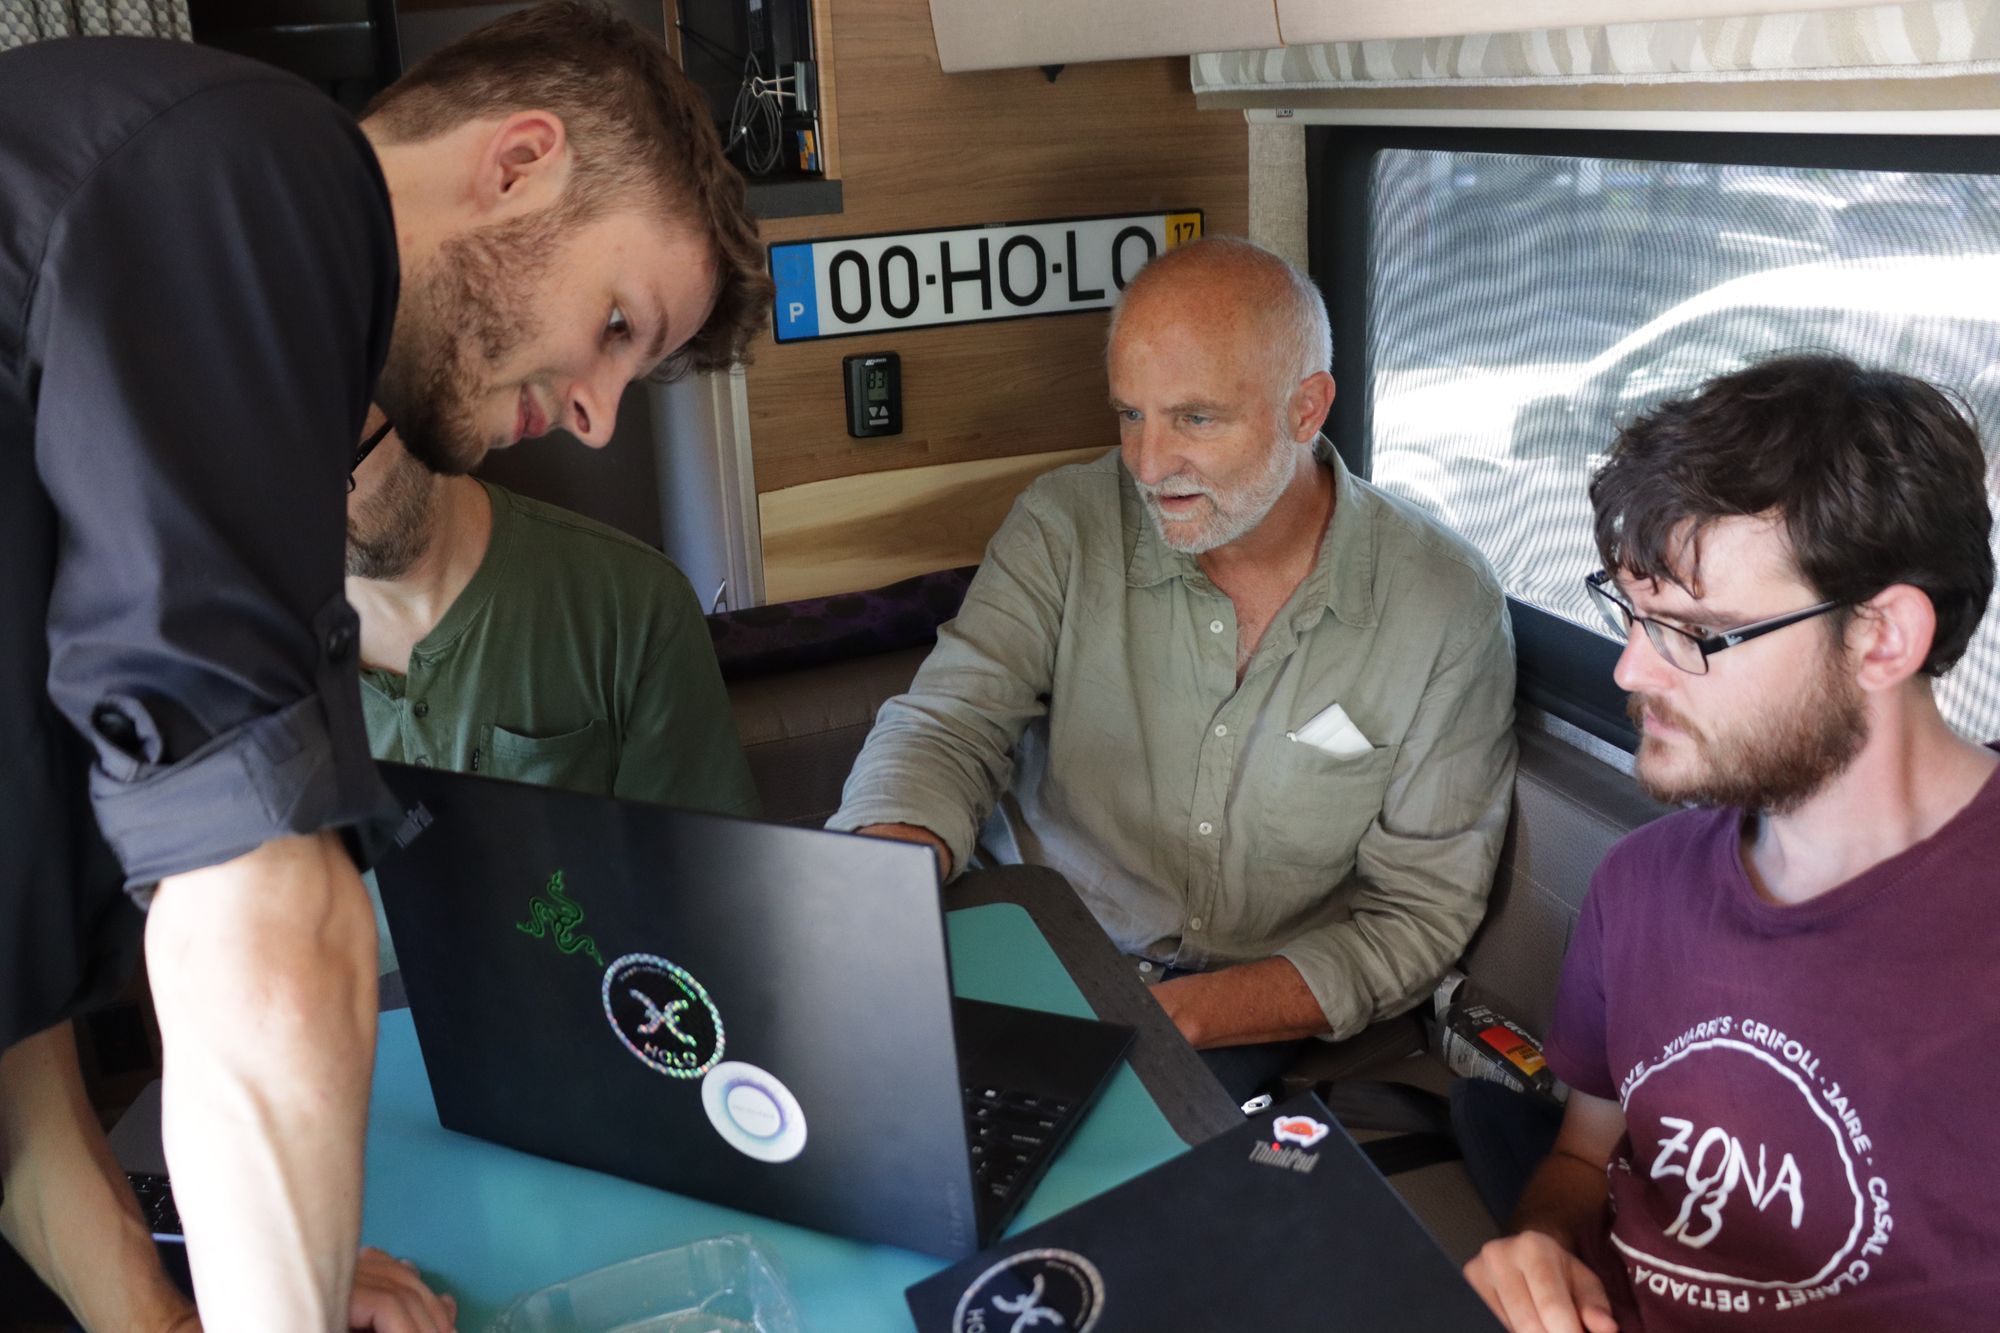 Four developers looking at a laptop in a camper van parked at a gas station